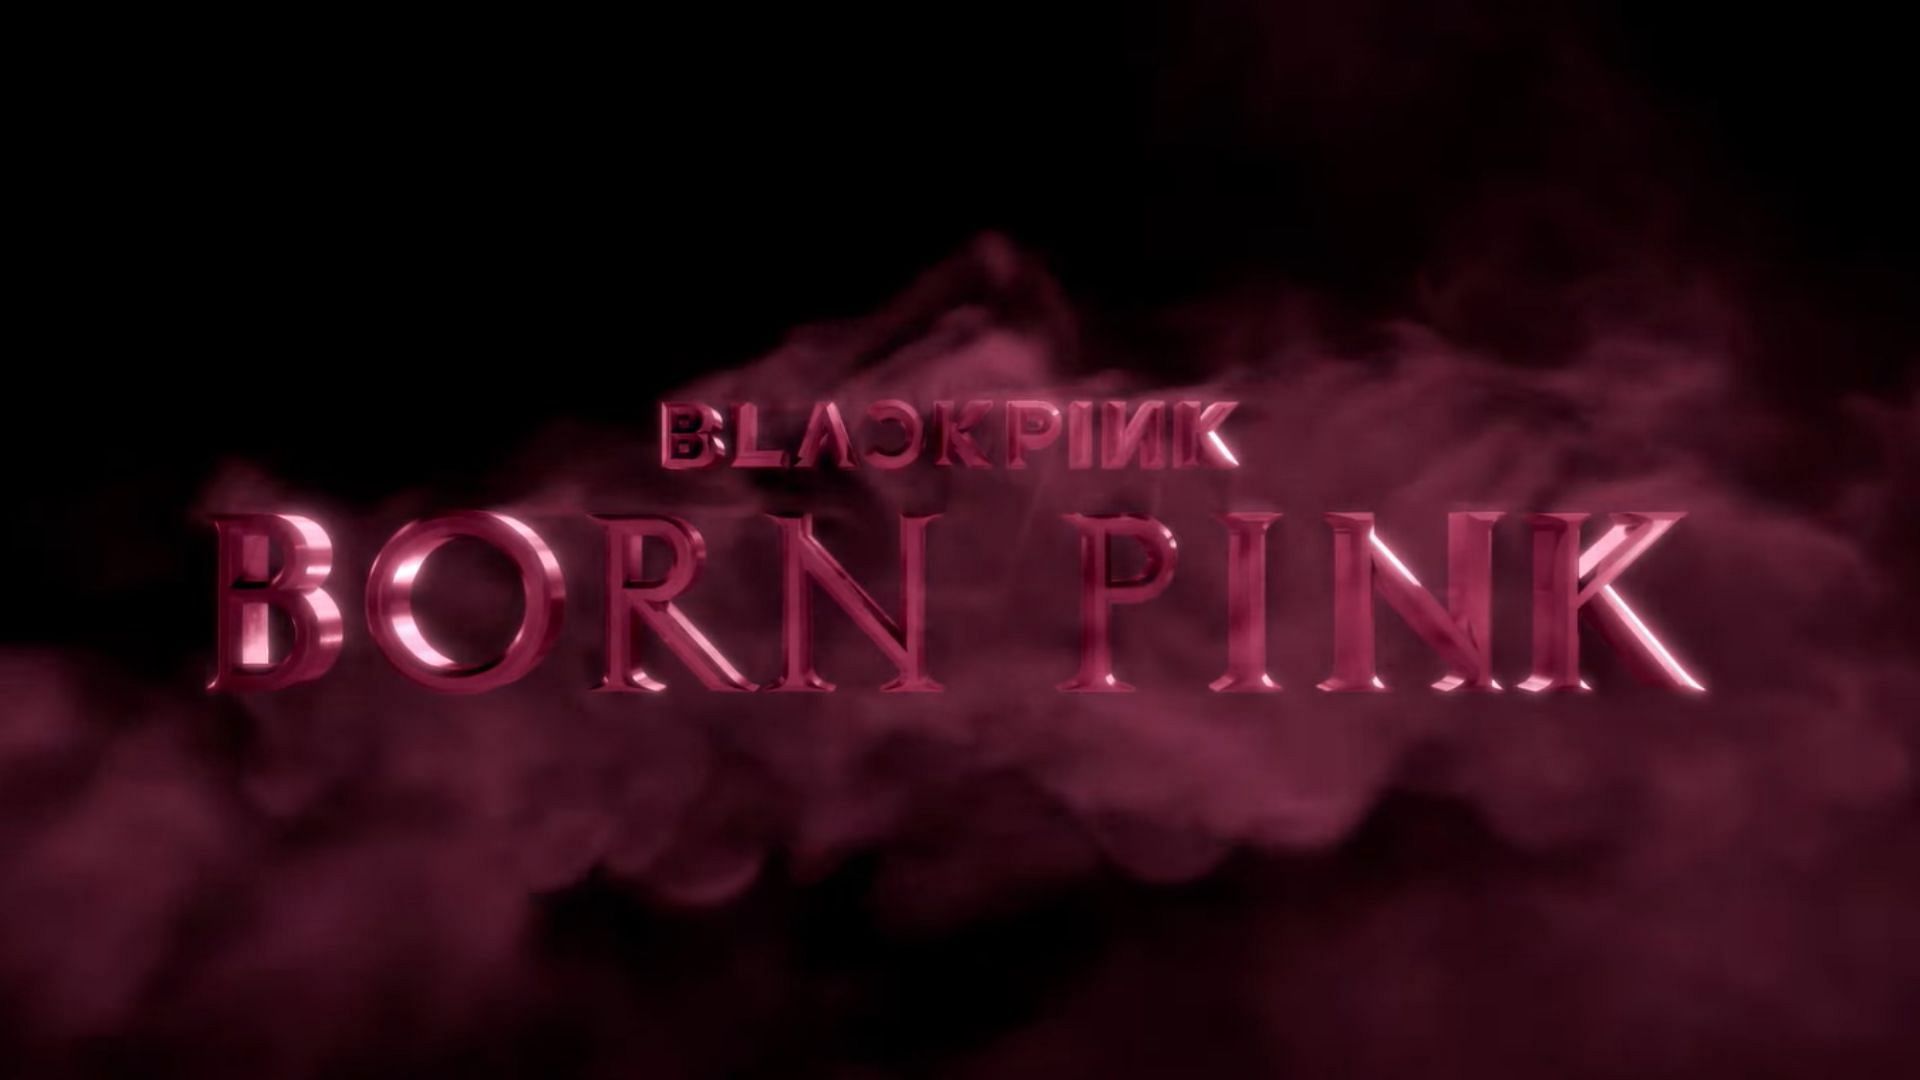 BLACKPINK announces comeback with BORN PINK, fans say 'no more clowning